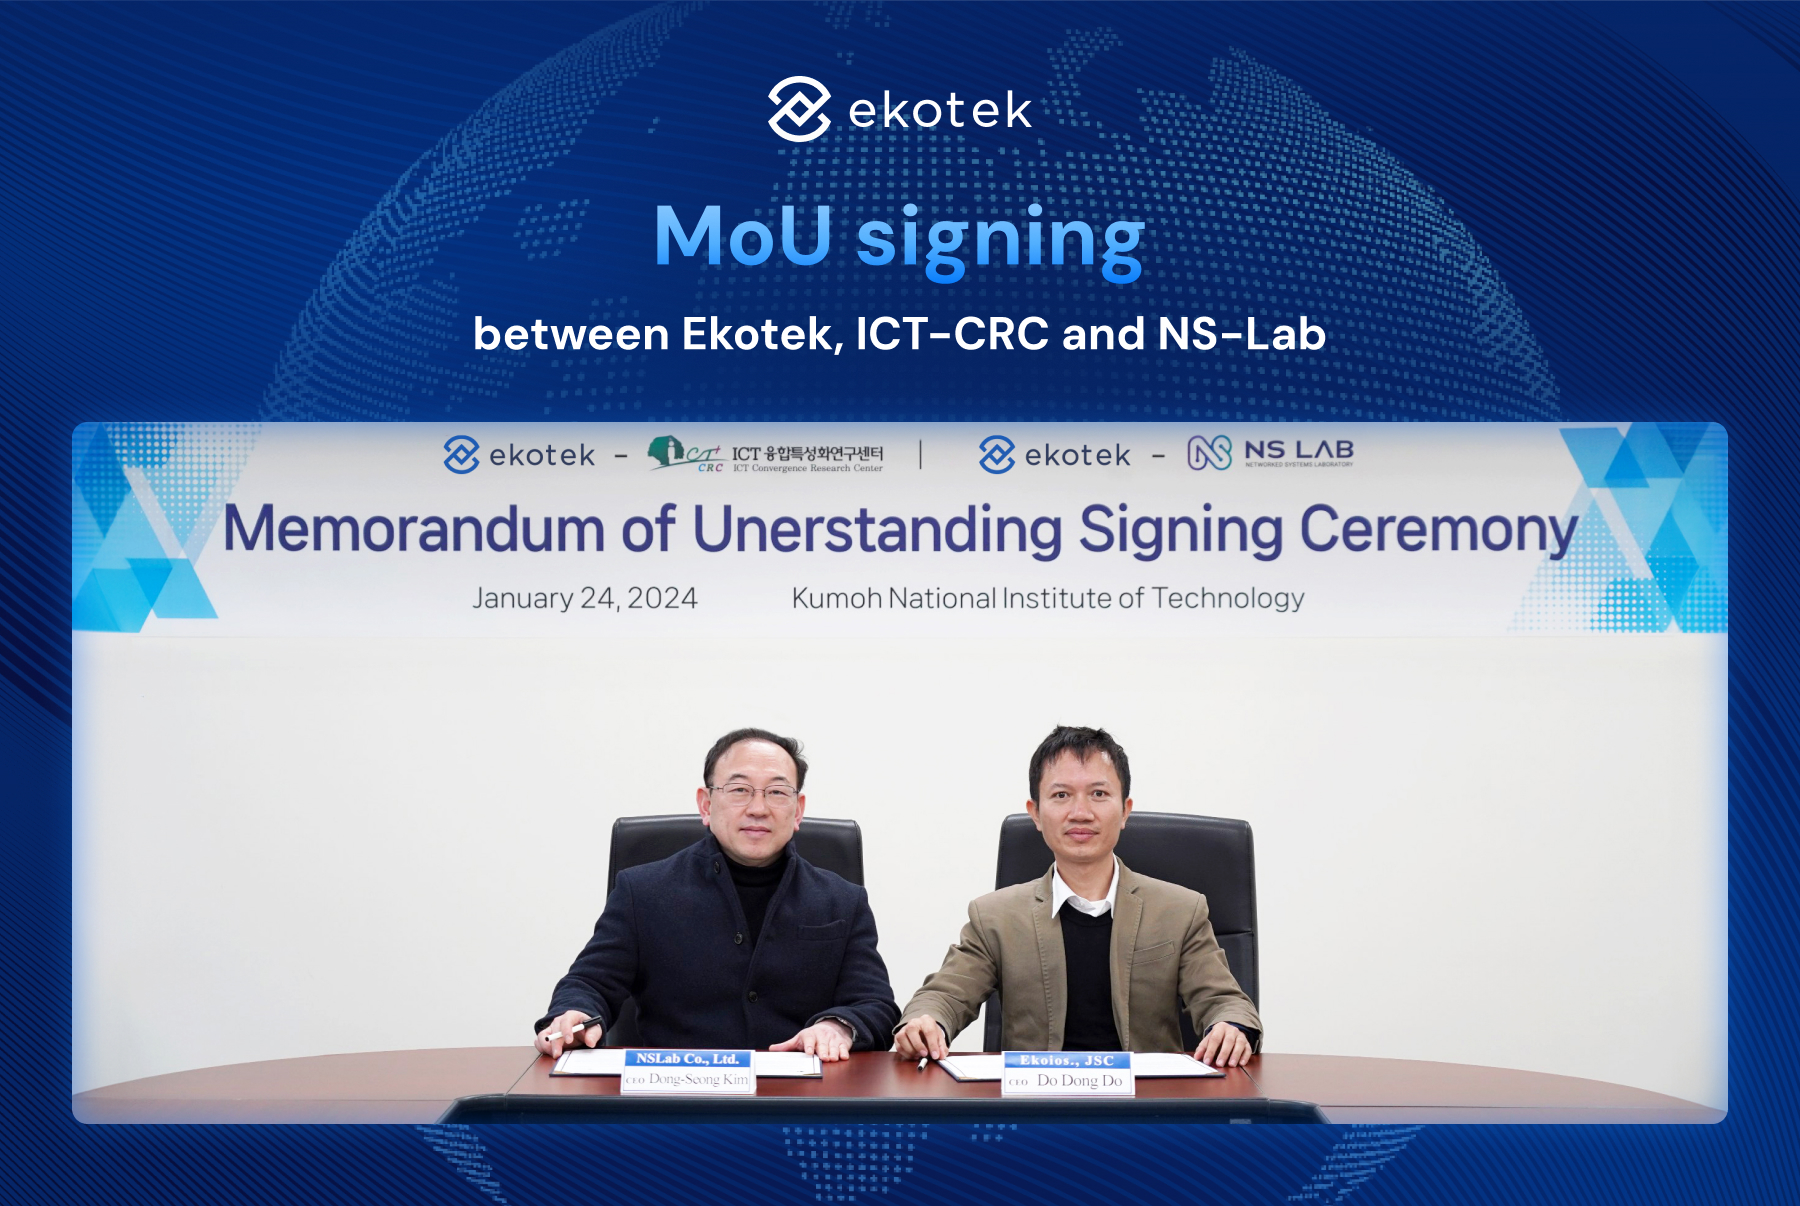 Ekotek signed MoU with ICT-CRC and NS-Lab for Metaverse and NFT platform projects